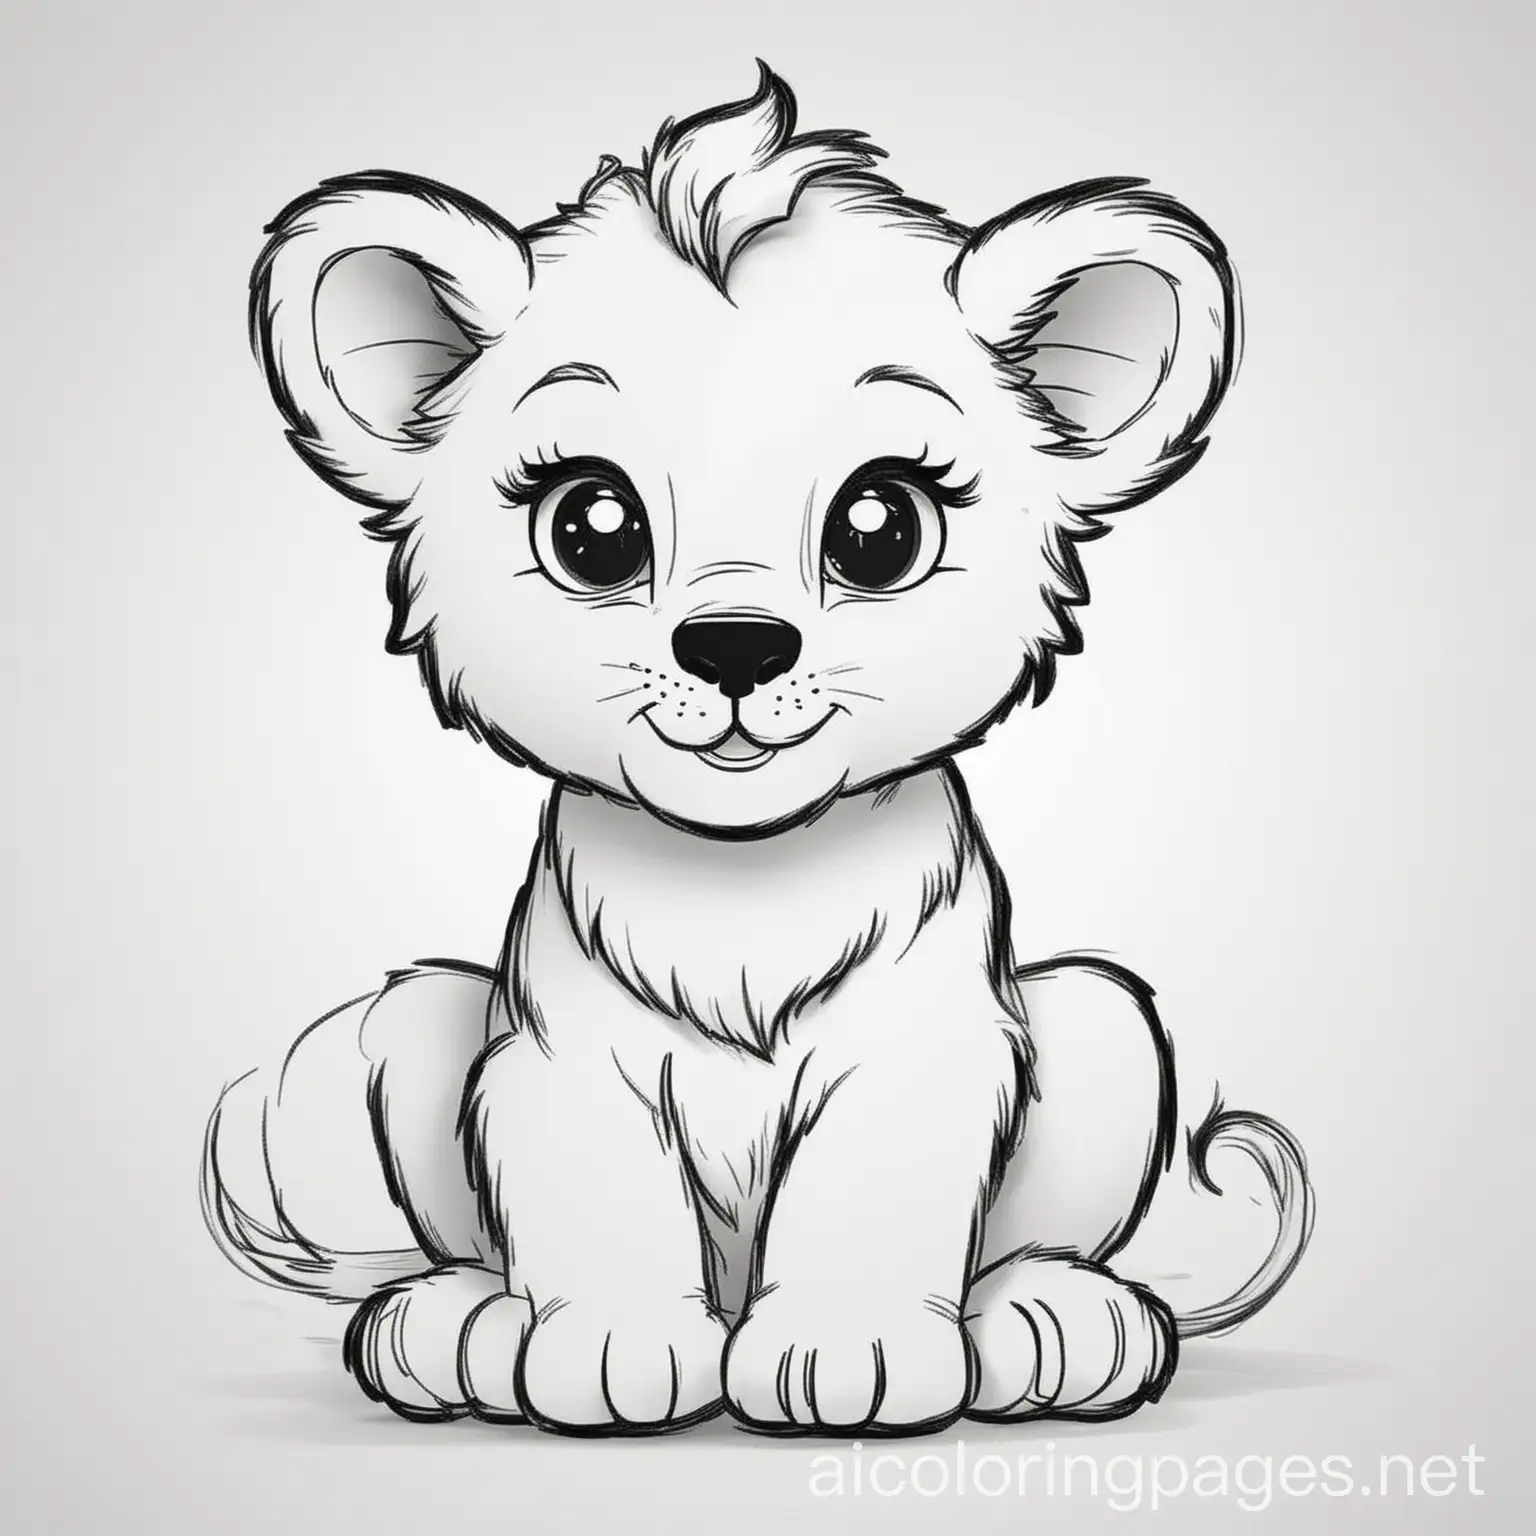 A cute friendly lion cub smiling, Coloring Page, black and white, line art, white background, Simplicity, Ample White Space. The background of the coloring page is plain white to make it easy for young children to color within the lines. The outlines of all the subjects are easy to distinguish, making it simple for kids to color without too much difficulty, Coloring Page, black and white, line art, white background, Simplicity, Ample White Space. The background of the coloring page is plain white to make it easy for young children to color within the lines. The outlines of all the subjects are easy to distinguish, making it simple for kids to color without too much difficulty